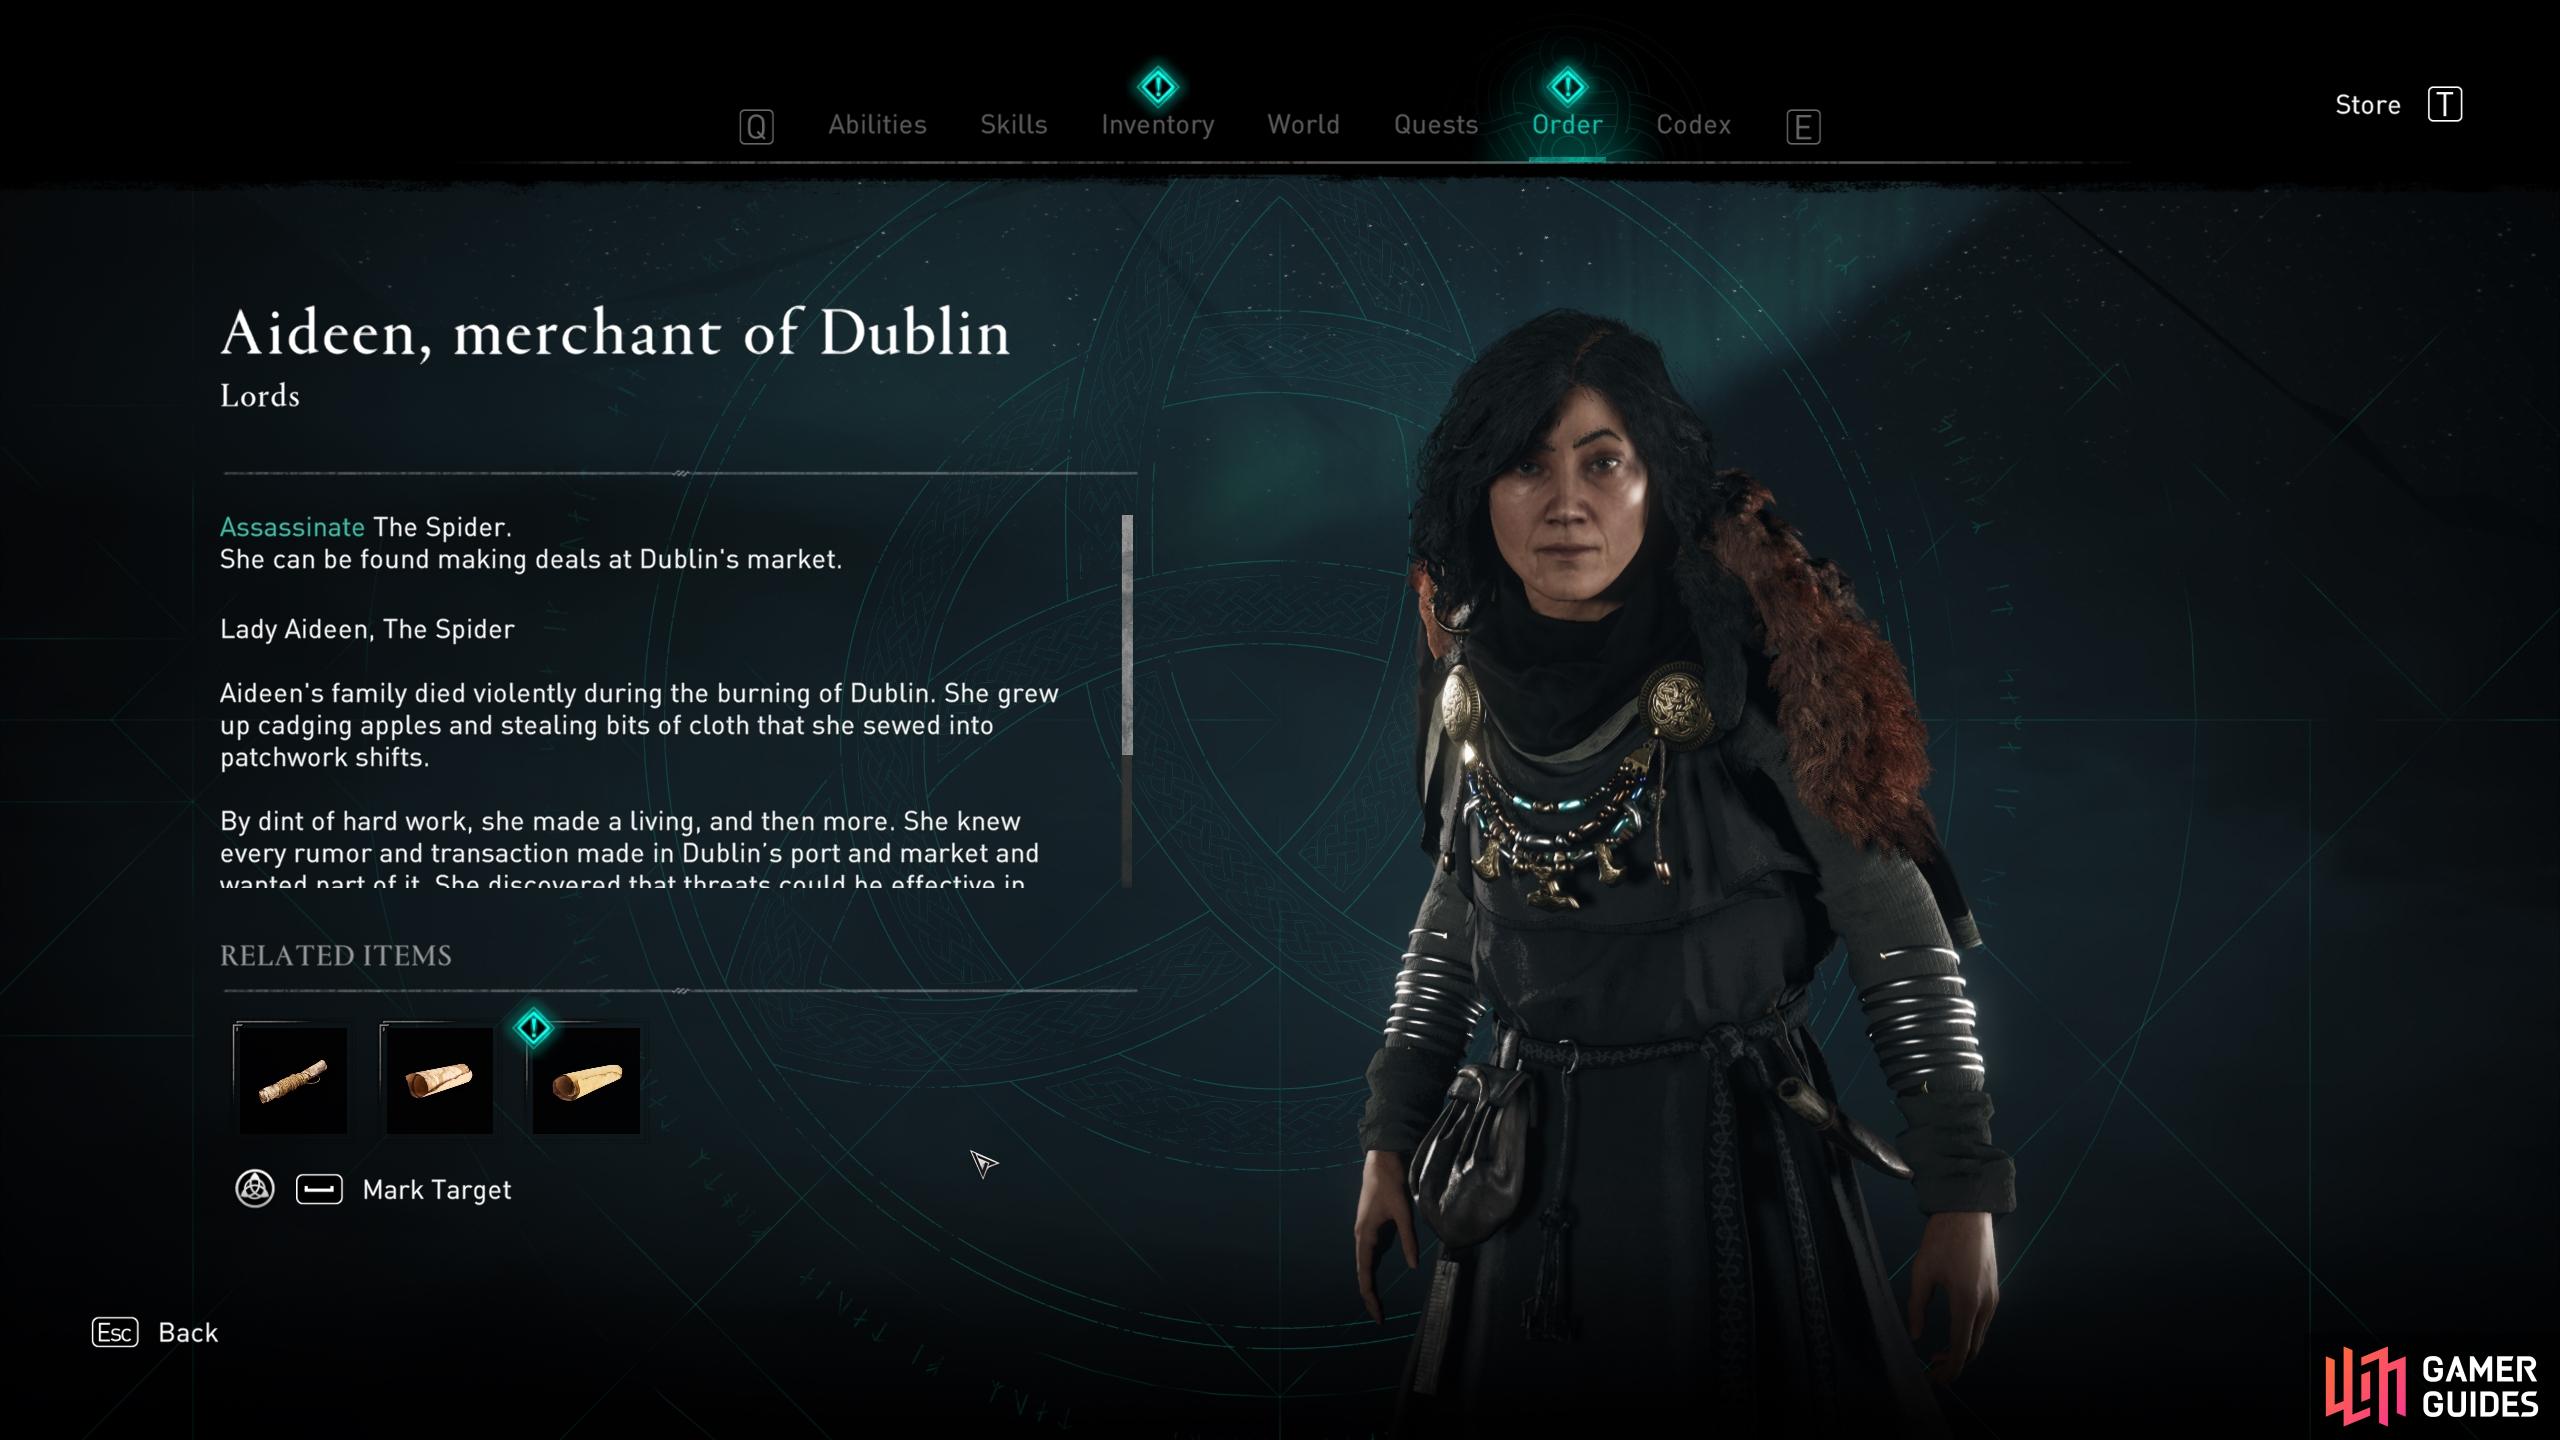 Once you've picked up the clue from the bench, The Spider will be revealed as Aideen, merchant of Dublin.